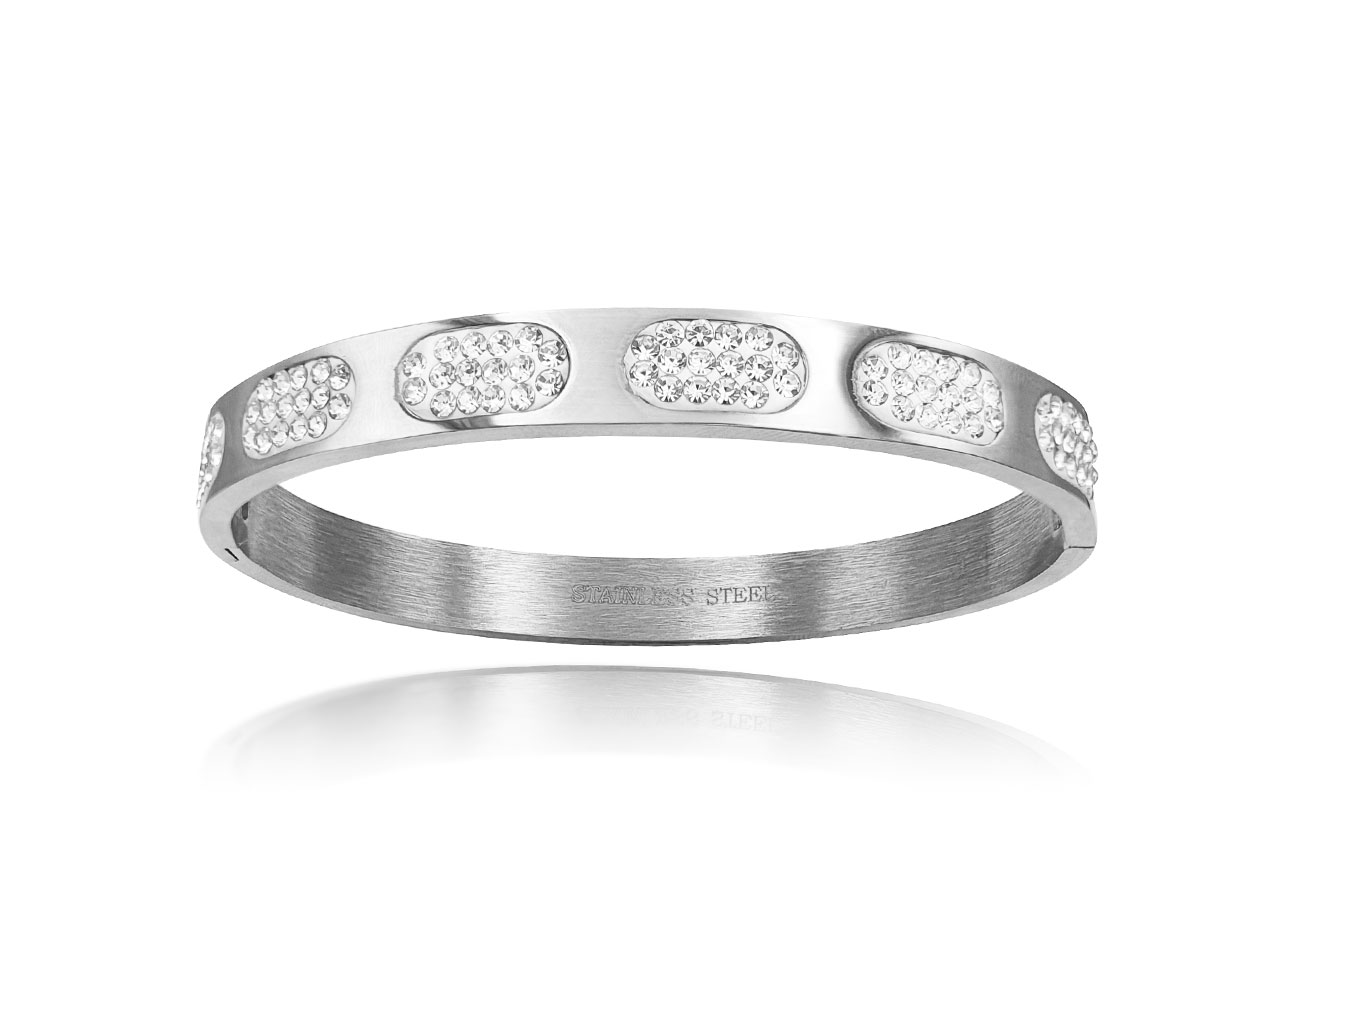 Sparkling Thick Bracelet Silver Plated - Adema